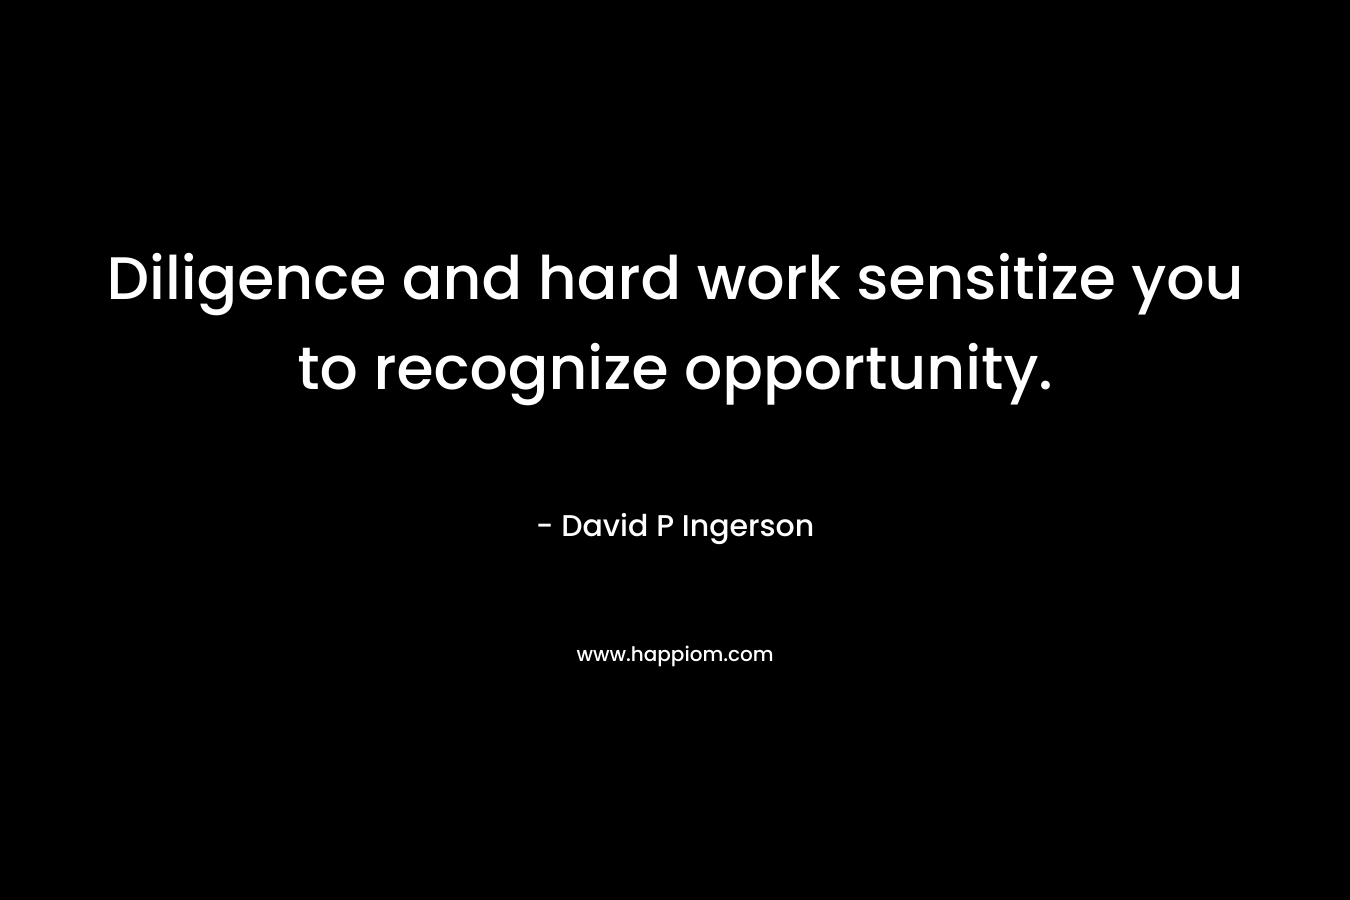 Diligence and hard work sensitize you to recognize opportunity.